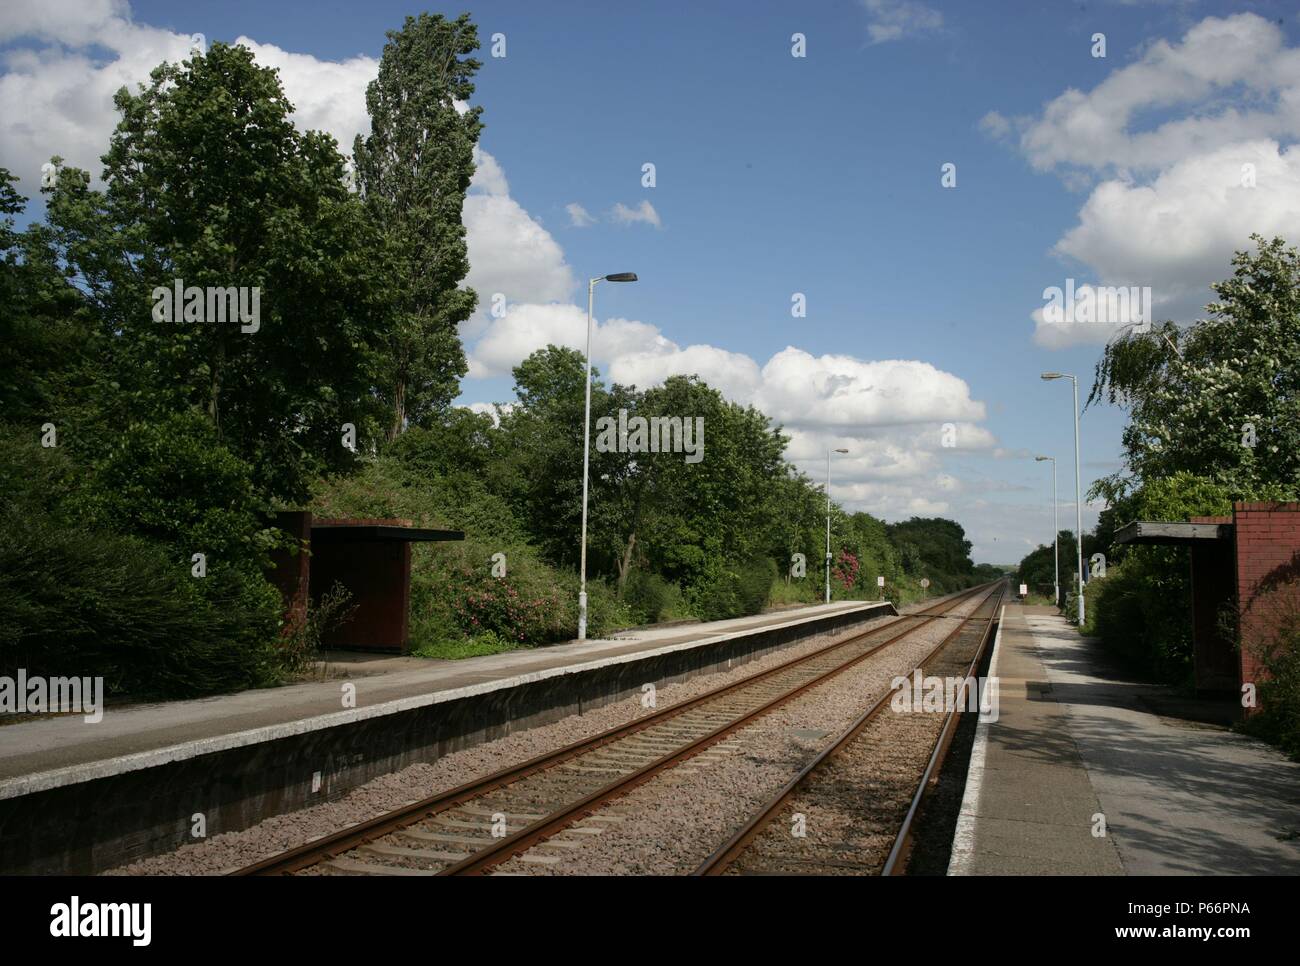 General view of the platforms, waiting shelters and lighting at Elton and Orston station, Lincolnshire. 2007 Stock Photo